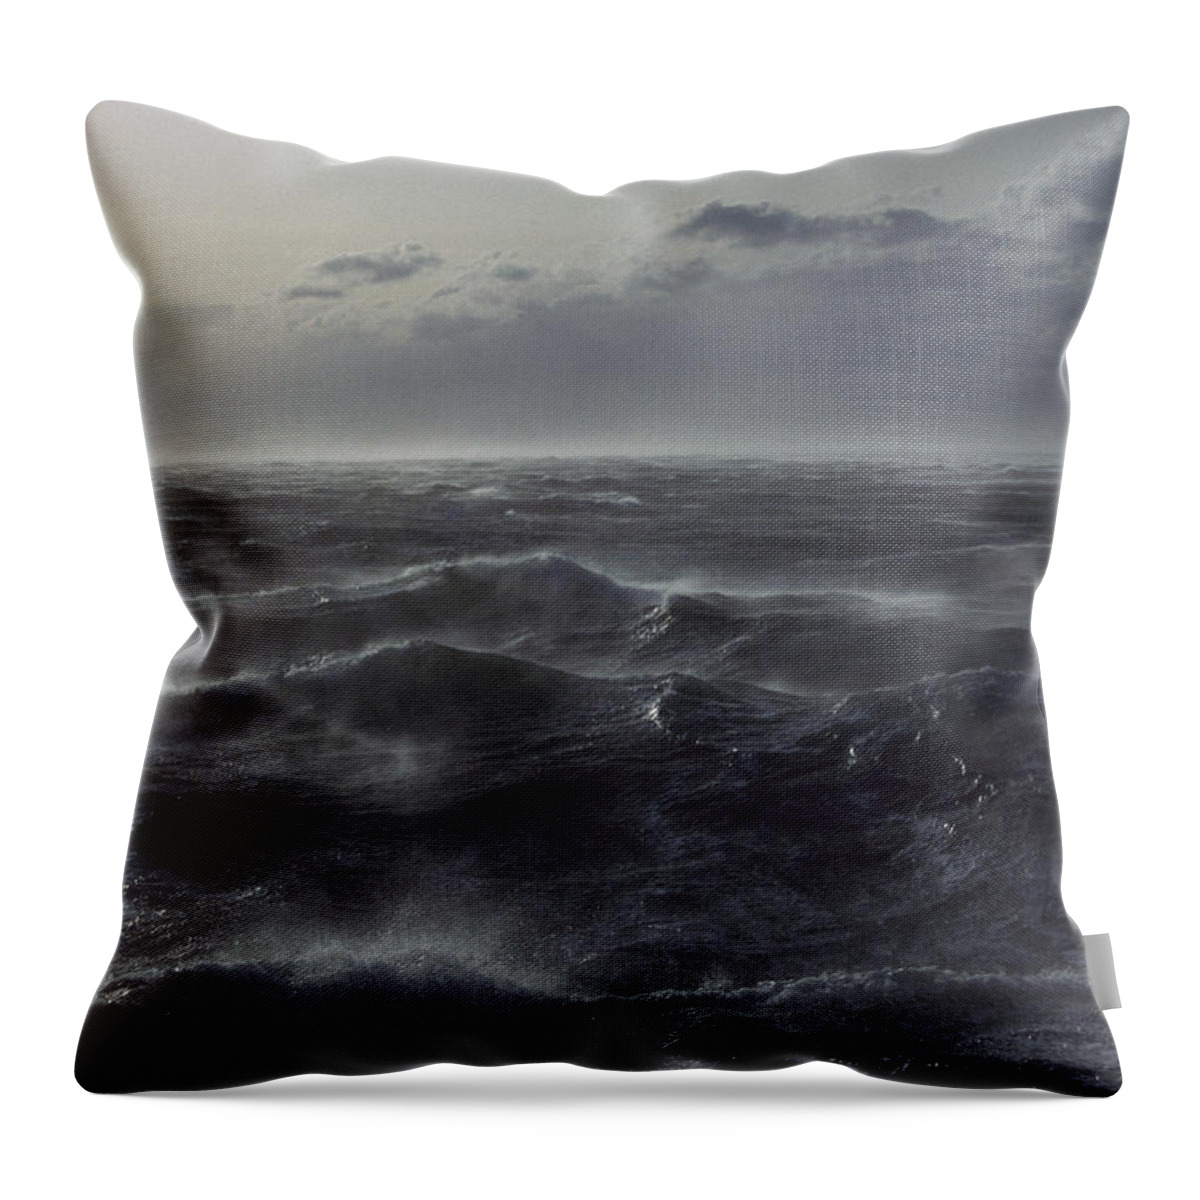 Feb0514 Throw Pillow featuring the photograph Windstorm Over Ocean In Beagle Channel by Colin Monteath